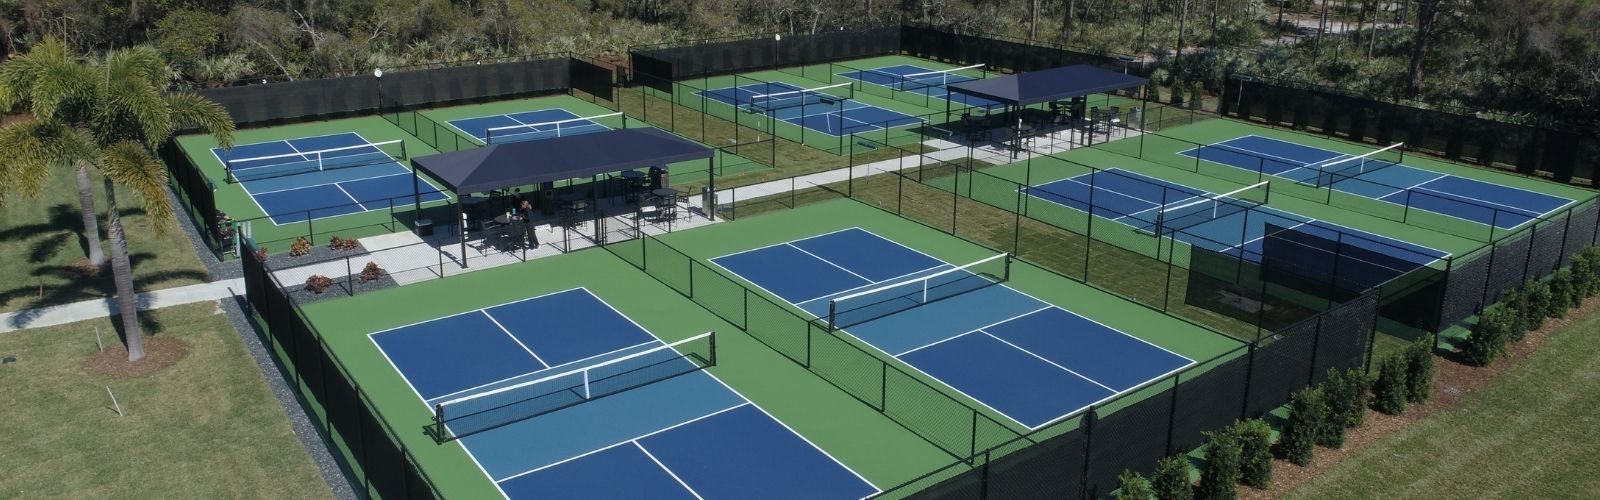 A First Look at the New Pickleball Courts at Harbour Ridge